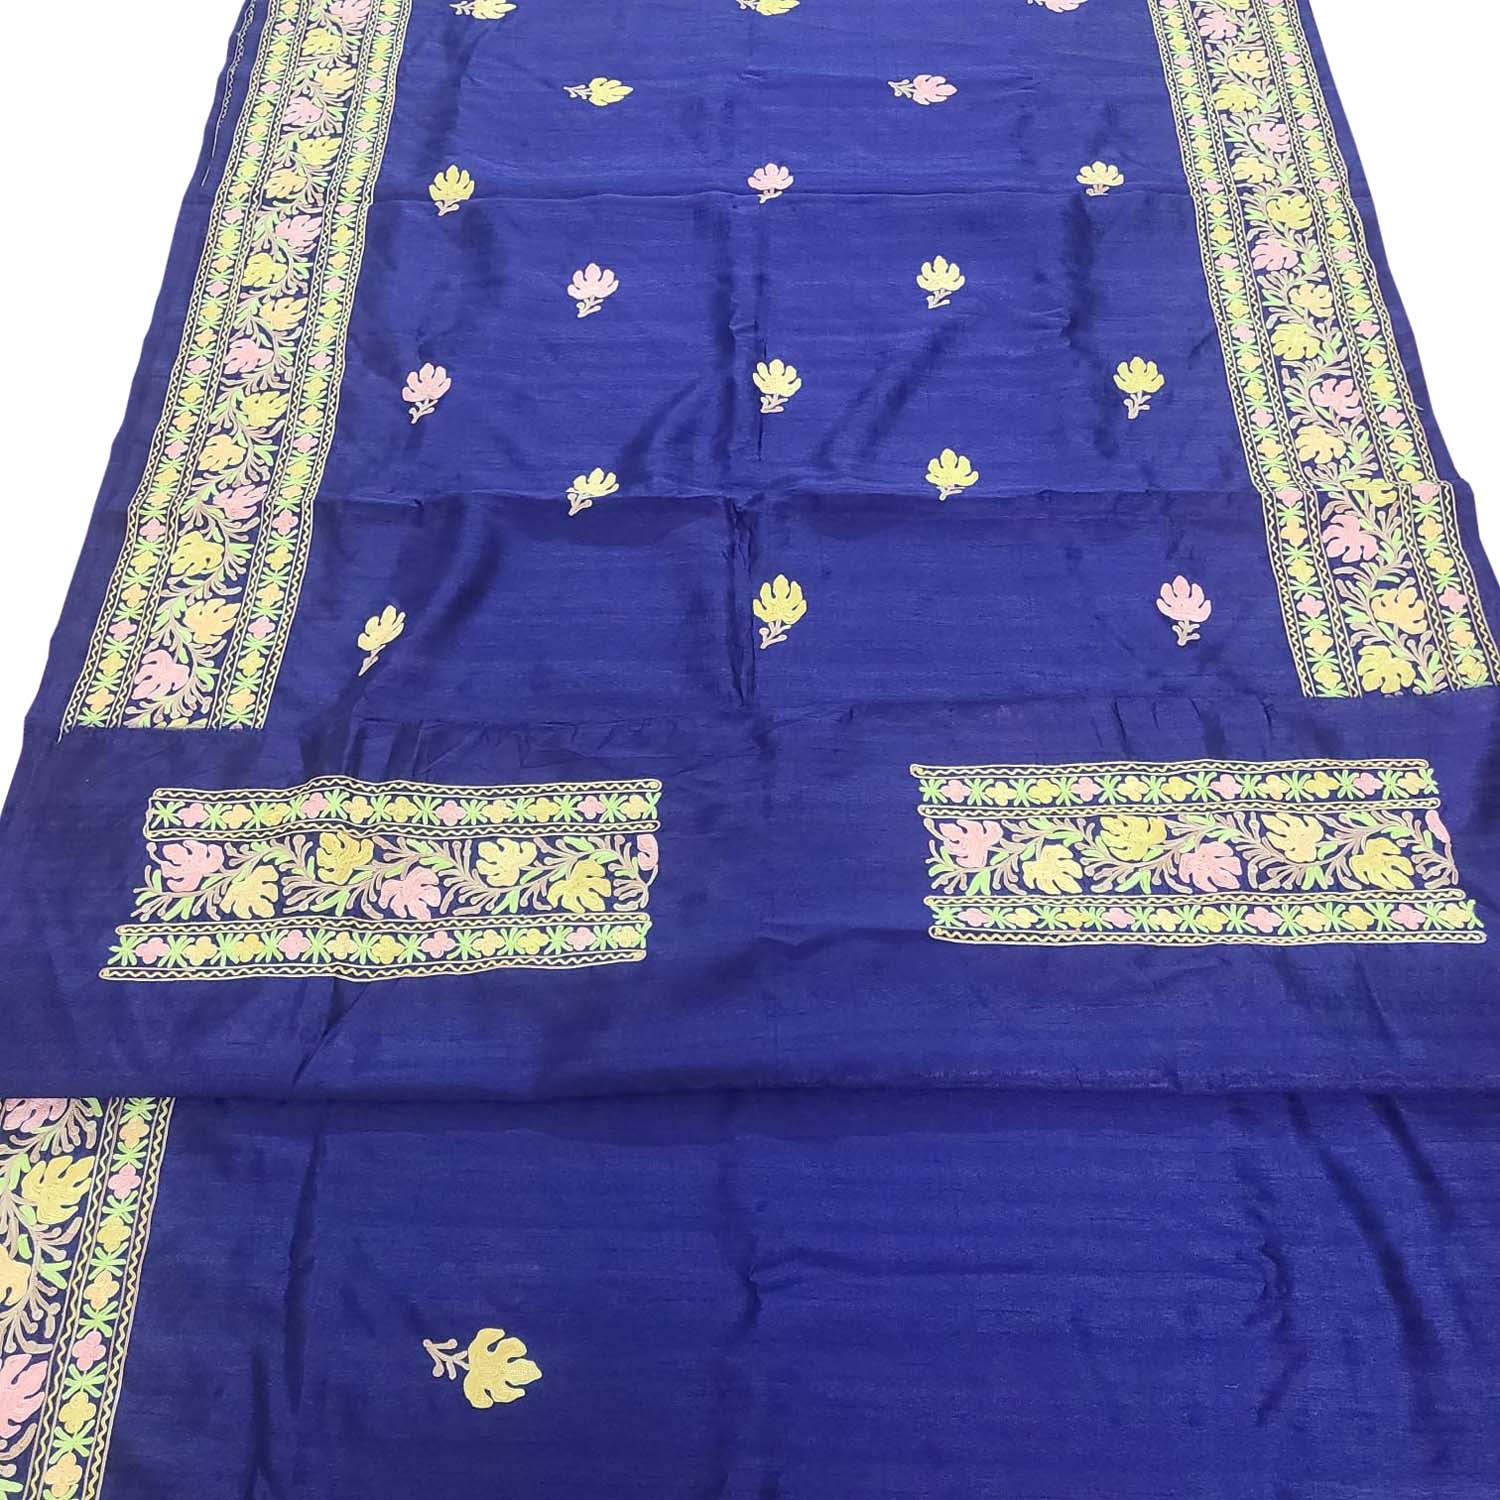 Exquisite Blue Silk Saree with Hand Embroidery - Luxurion World